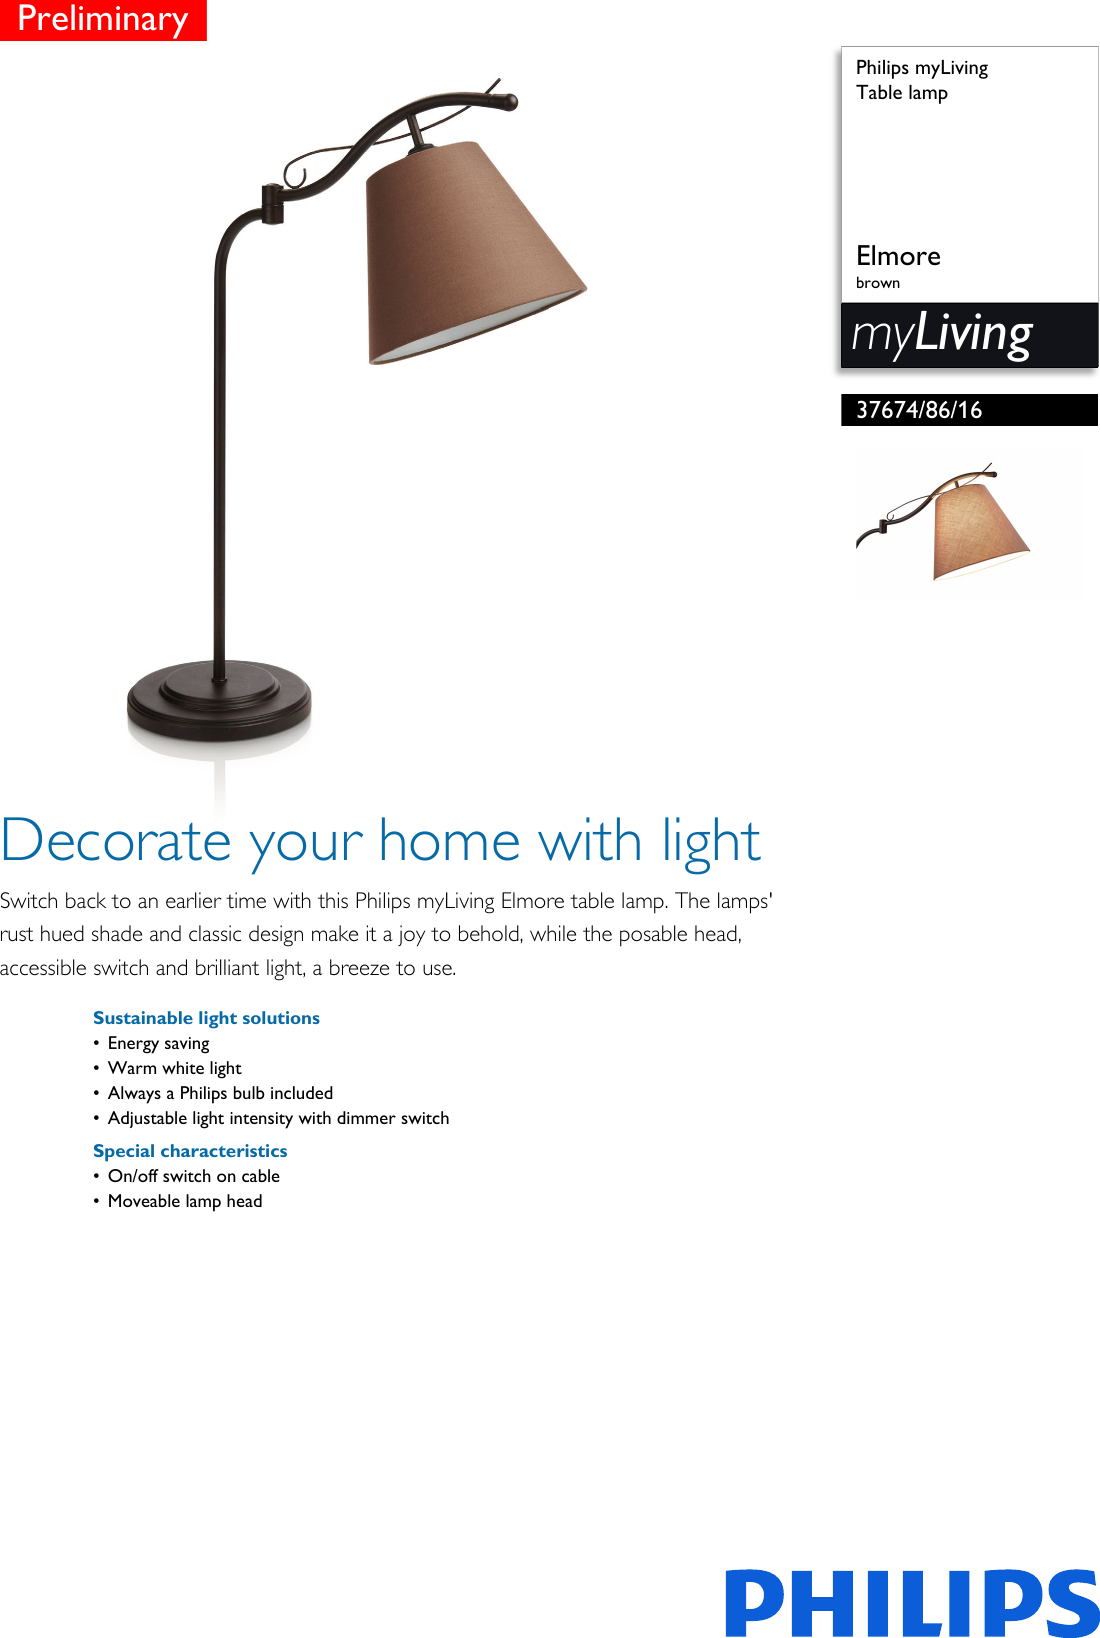 Philips 376748616 Table Lamp Letak Pss, Philips Myliving Table Lamp